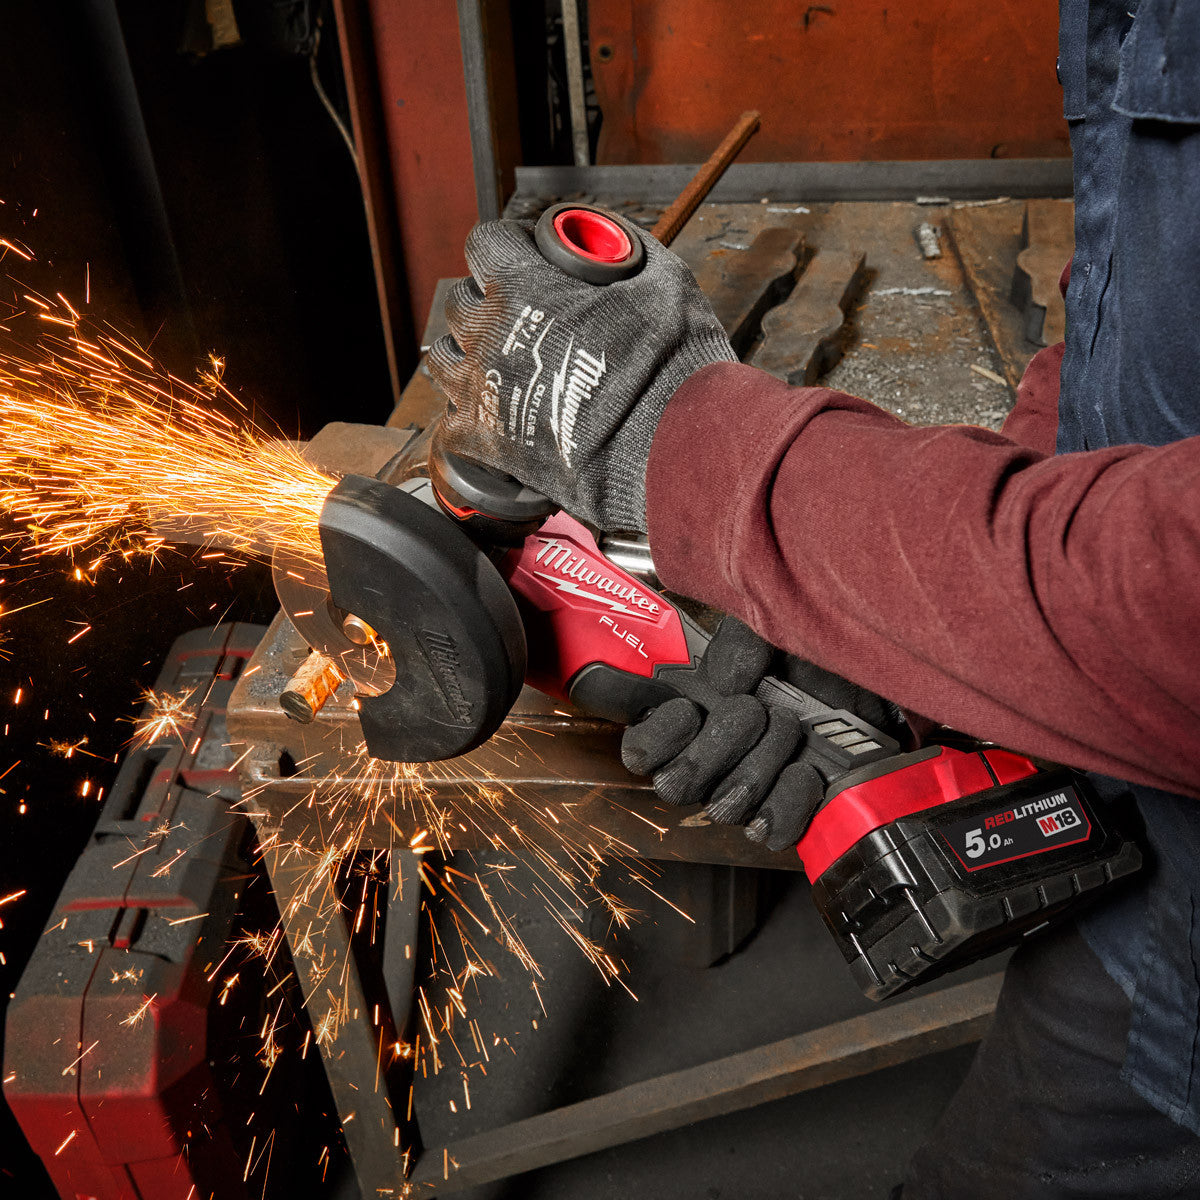 Milwaukee M18FSAG115X-0 18V Fuel Brushless Angle Grinder with 1 x 5.0Ah Battery & Charger